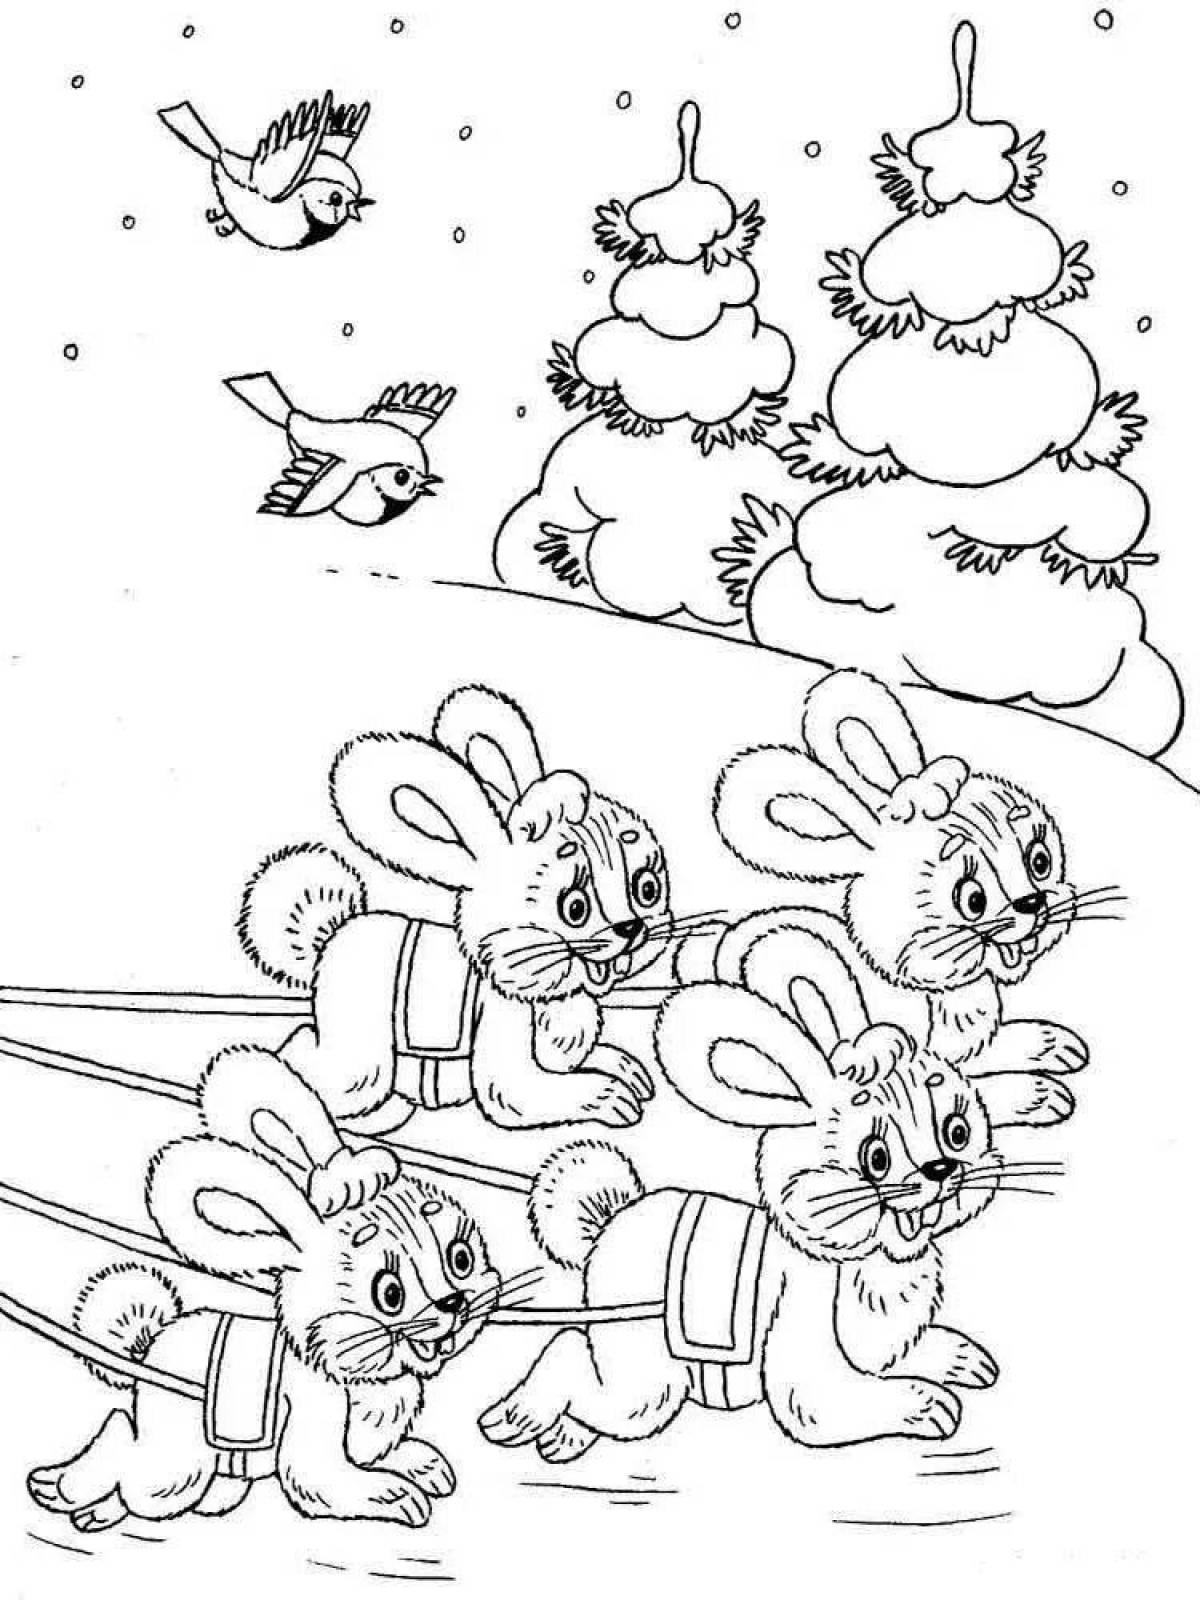 Sparkling January coloring page